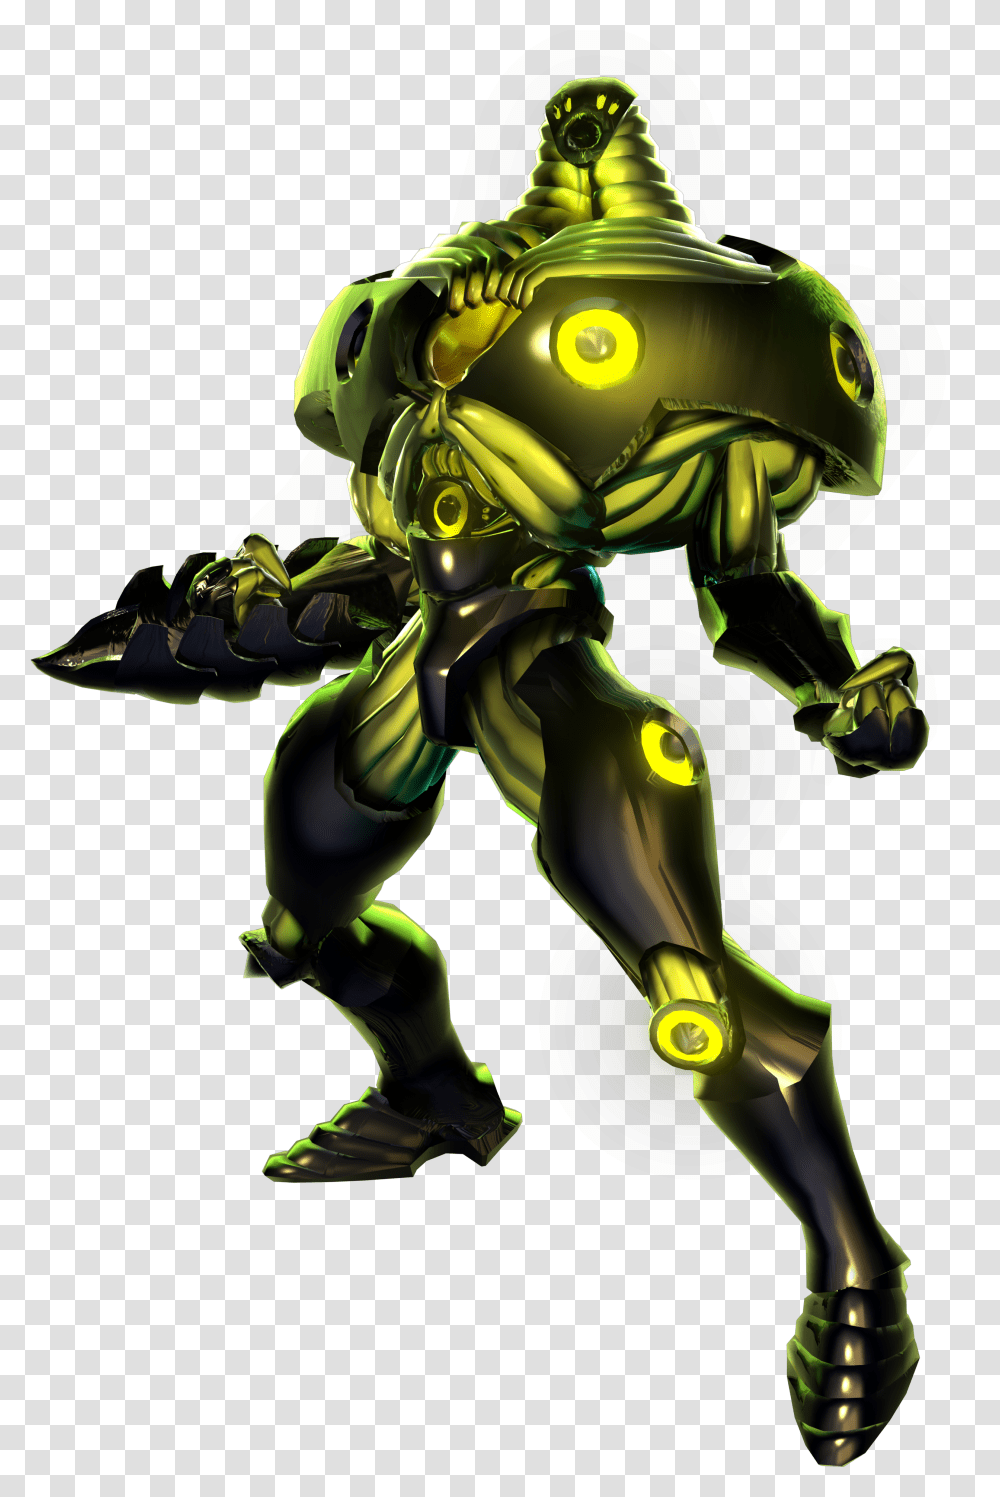 Metroid Prime Hunters Characters Transparent Png